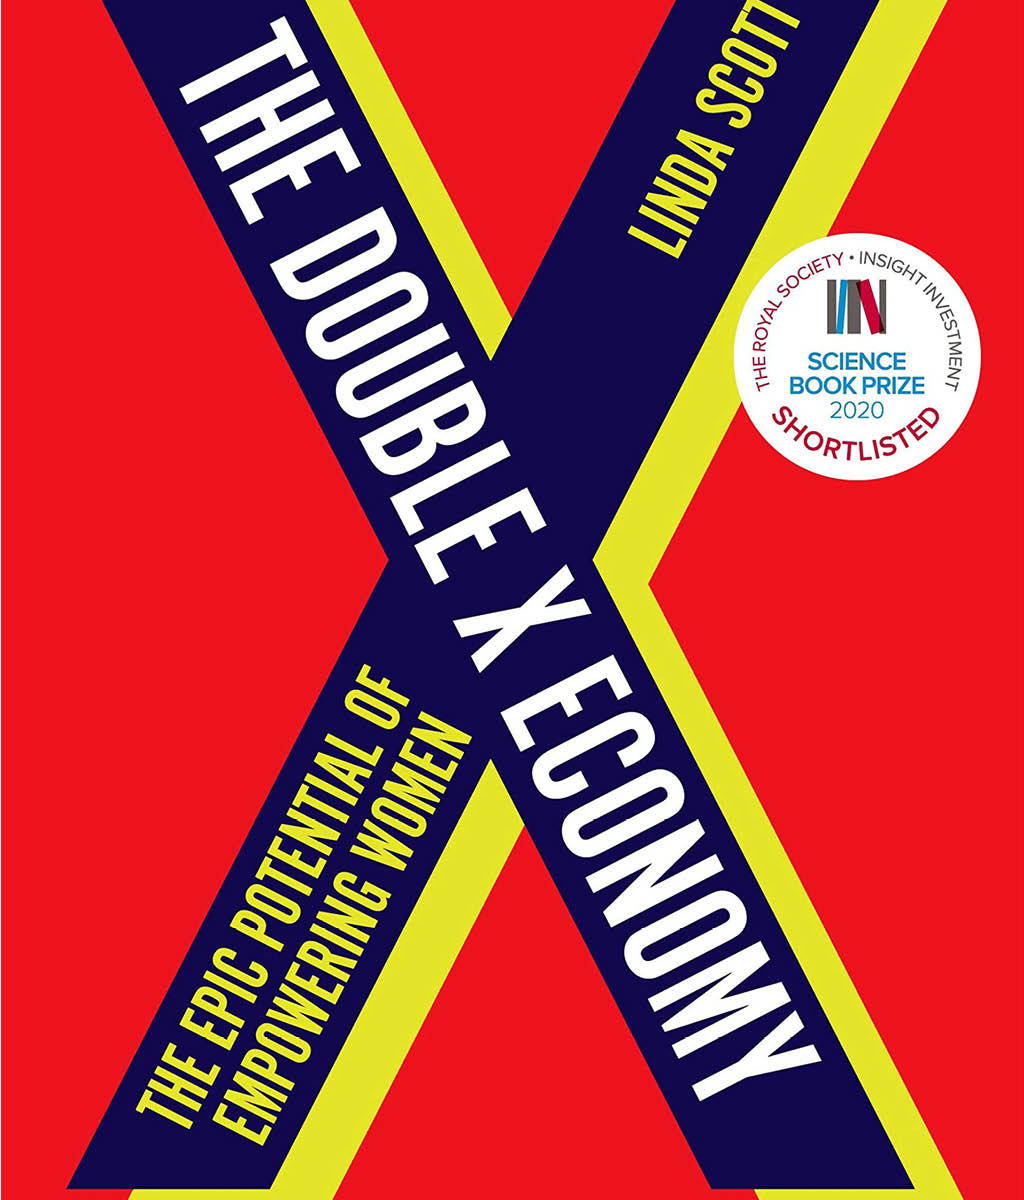 The Double X Economy : The Epic Potential of Empowering Women | A GUARDIAN SCIENCE BOOK OF THE YEAR by Professor Linda Scott